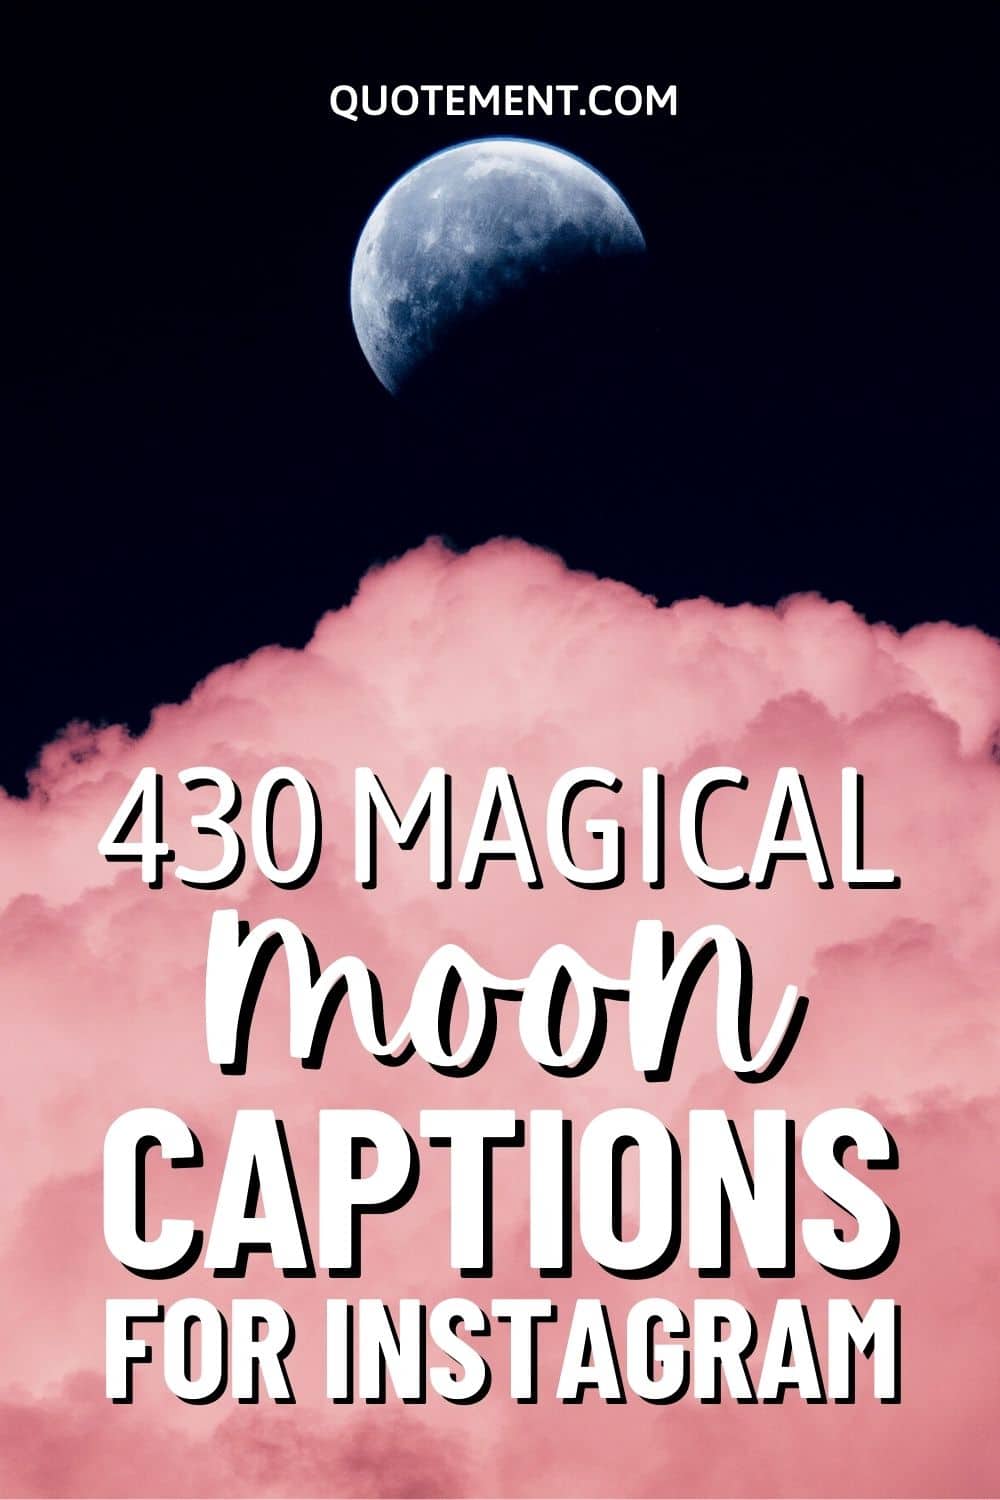 430 Beautiful Moon Captions For A Magical Instagram Post